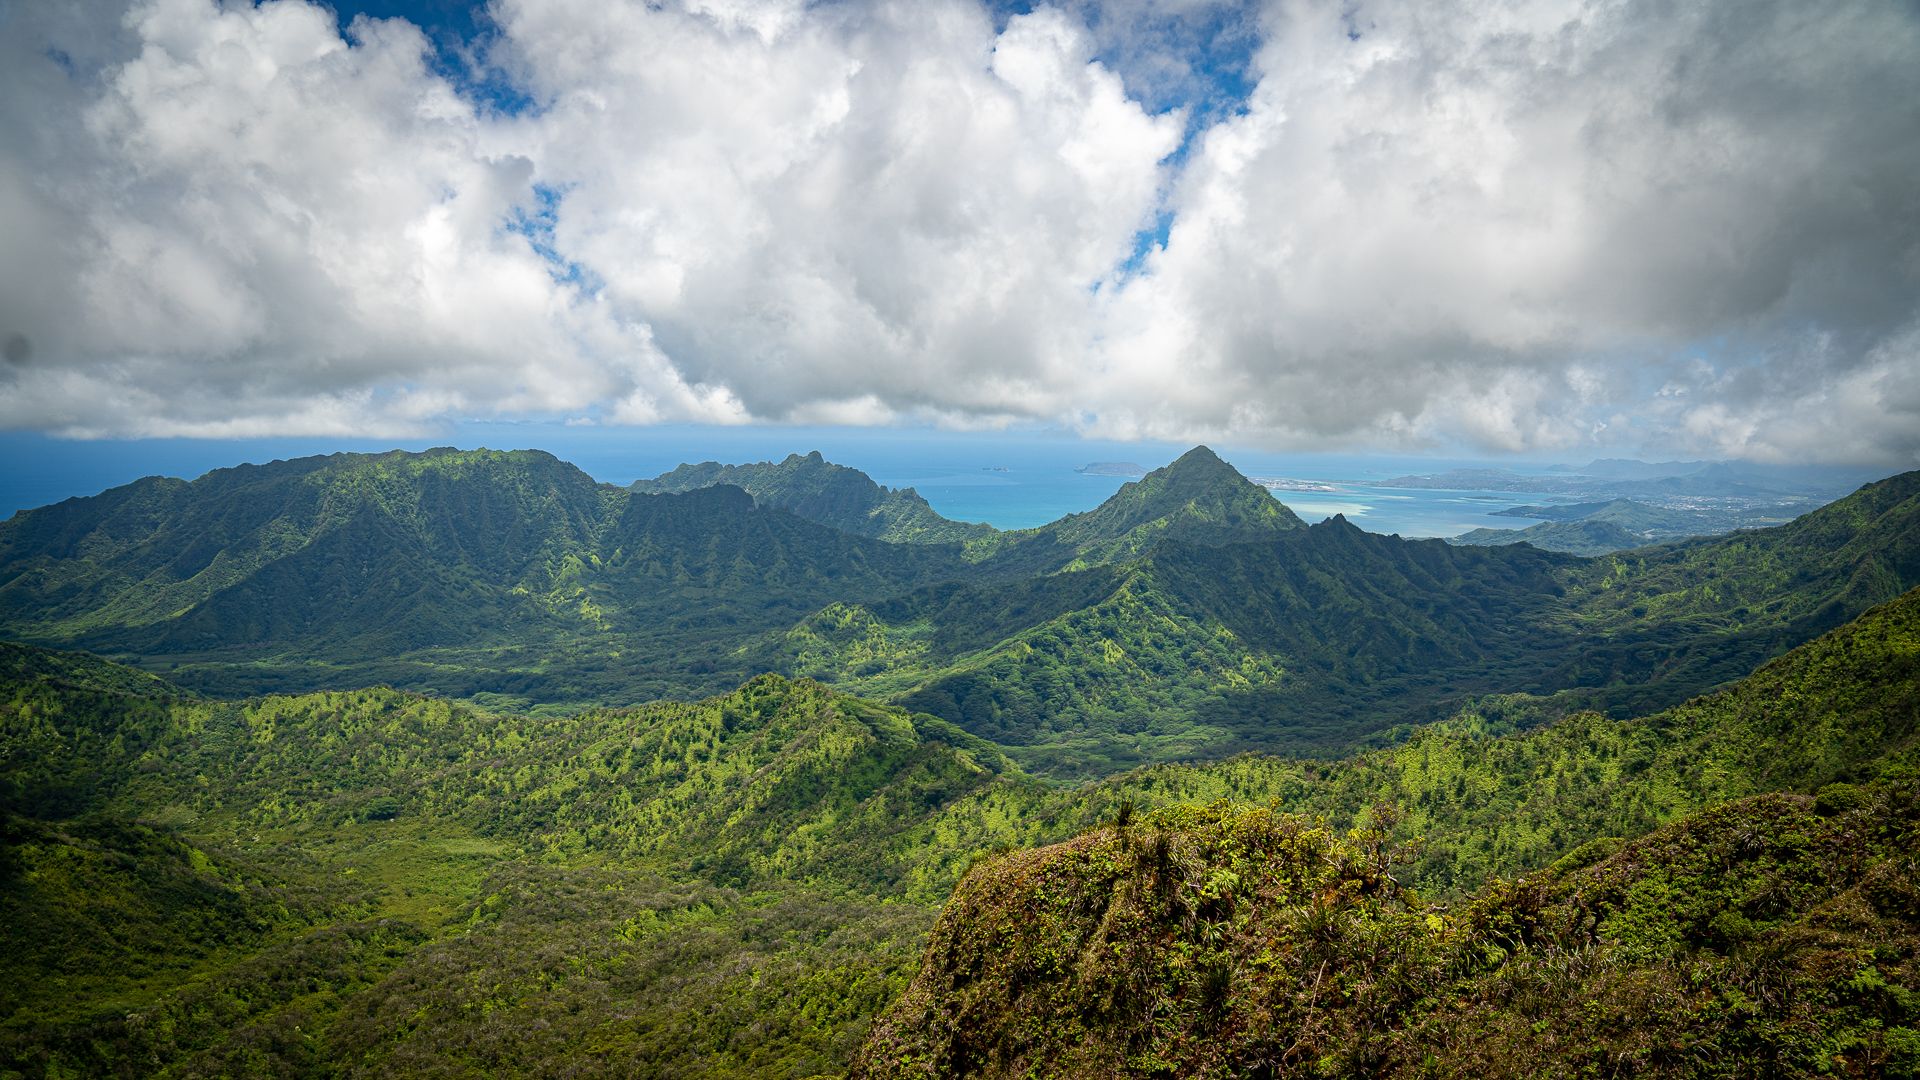 Watersheds provide clean drinking water, carbon sequestration and help prevent floods and droughts. A University of Hawaii study estimated the Koolau Range provides between $7.4 billion and $14 billion in value to the state. Image by Kuʻu Kauanoe/Civil Beat. United States, 2020.